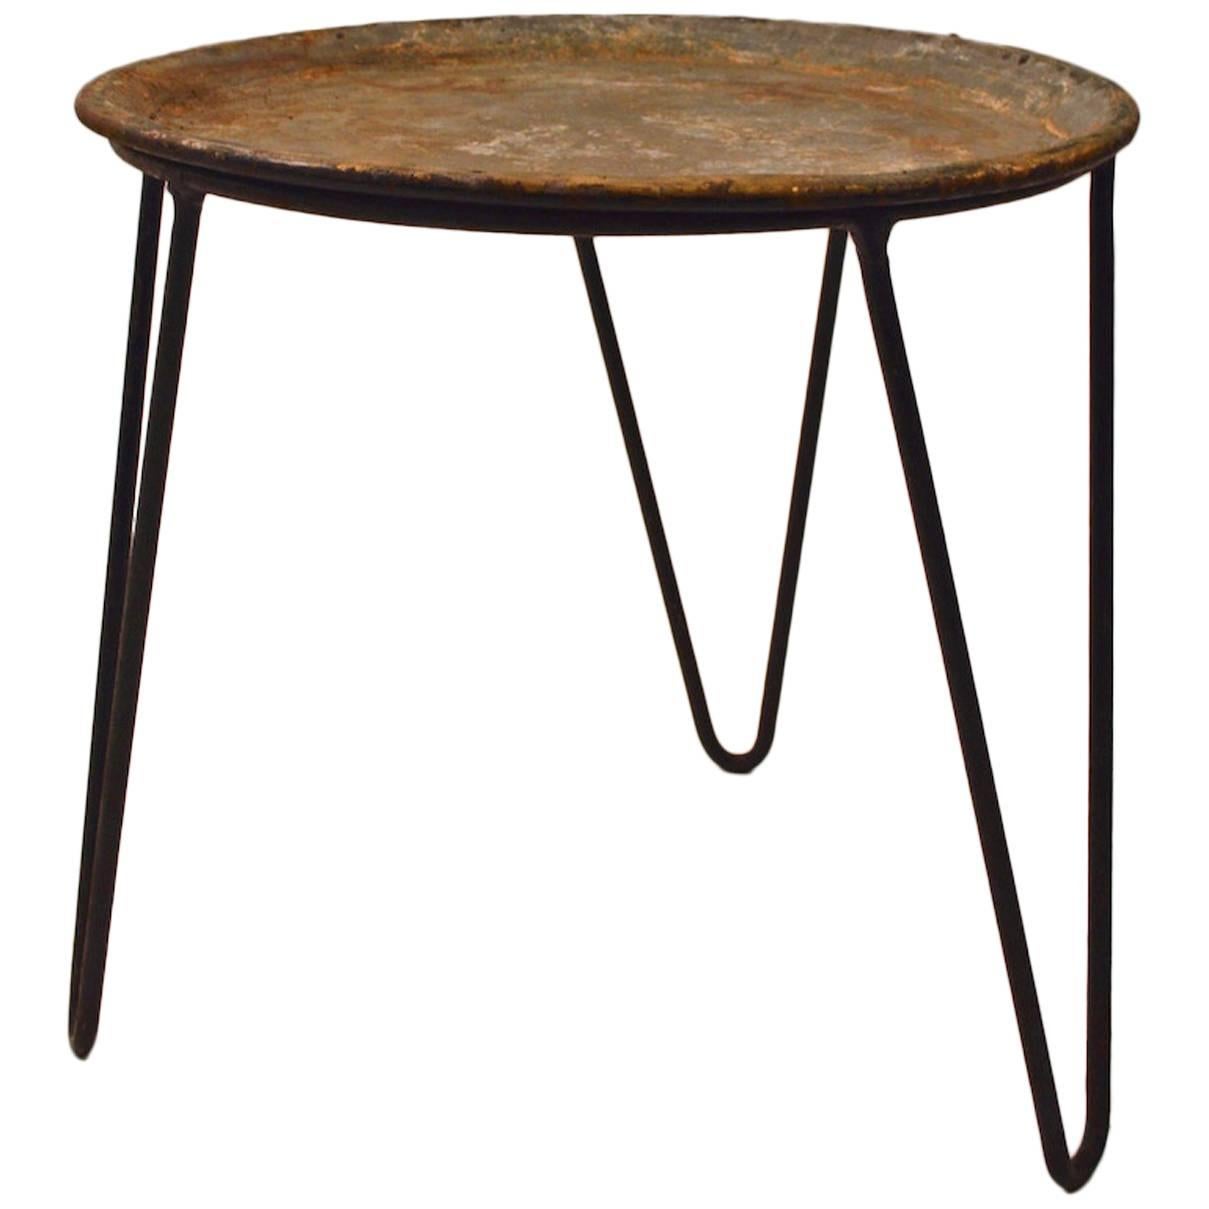 Round Wrought Iron and Zinc Plant Stand Tray Table with Hairpin Legs